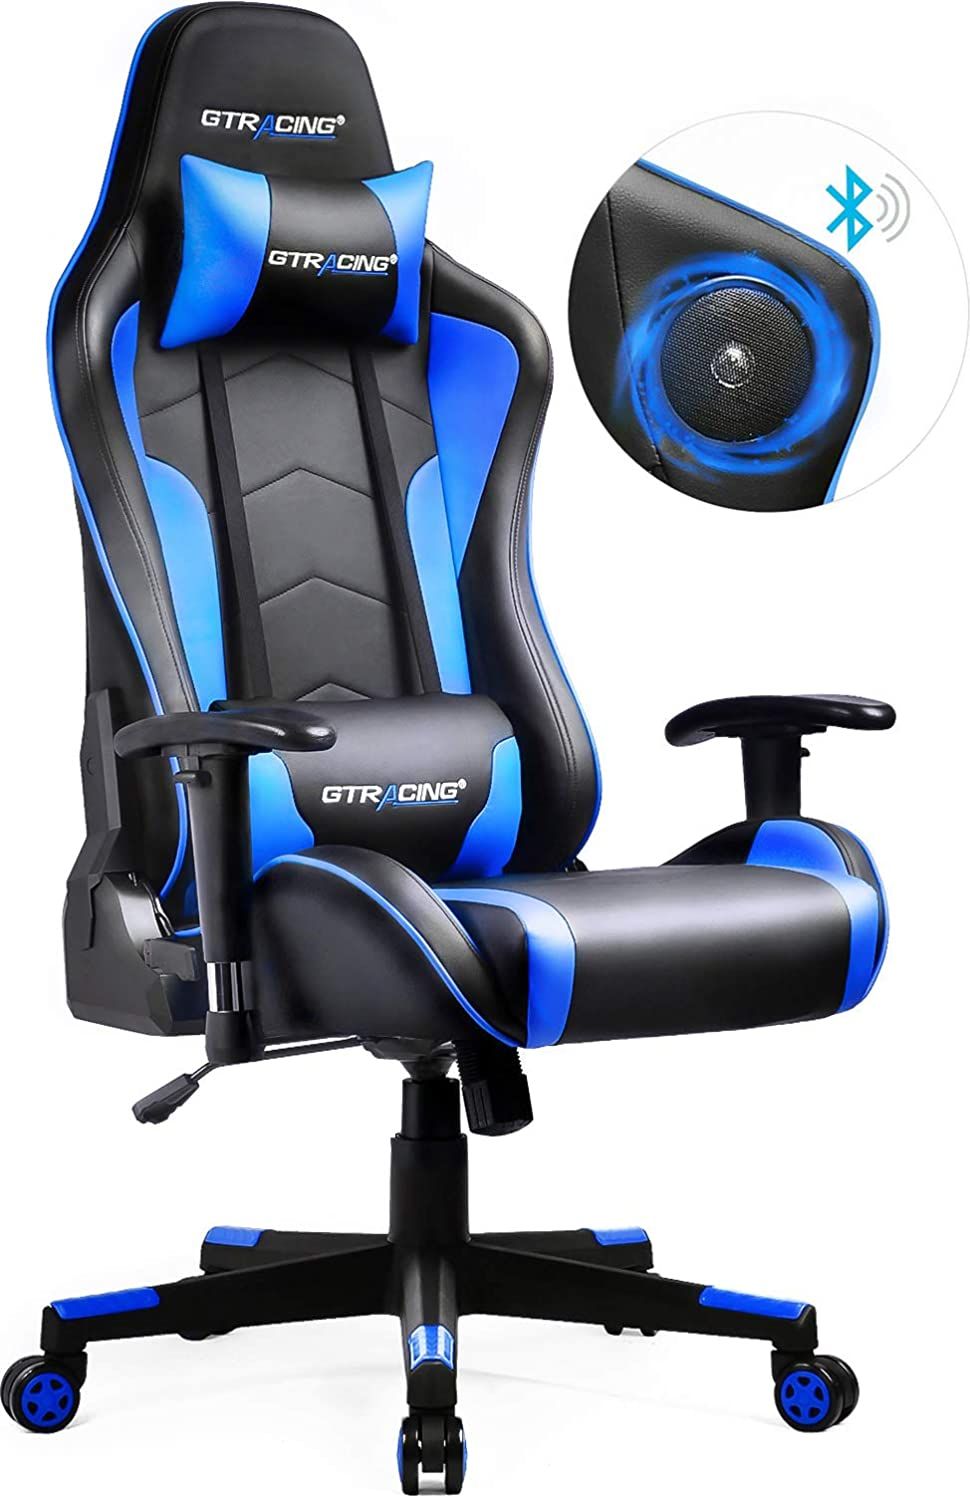 GTRACING Gaming Chair With Bluetooth Speakers 1 